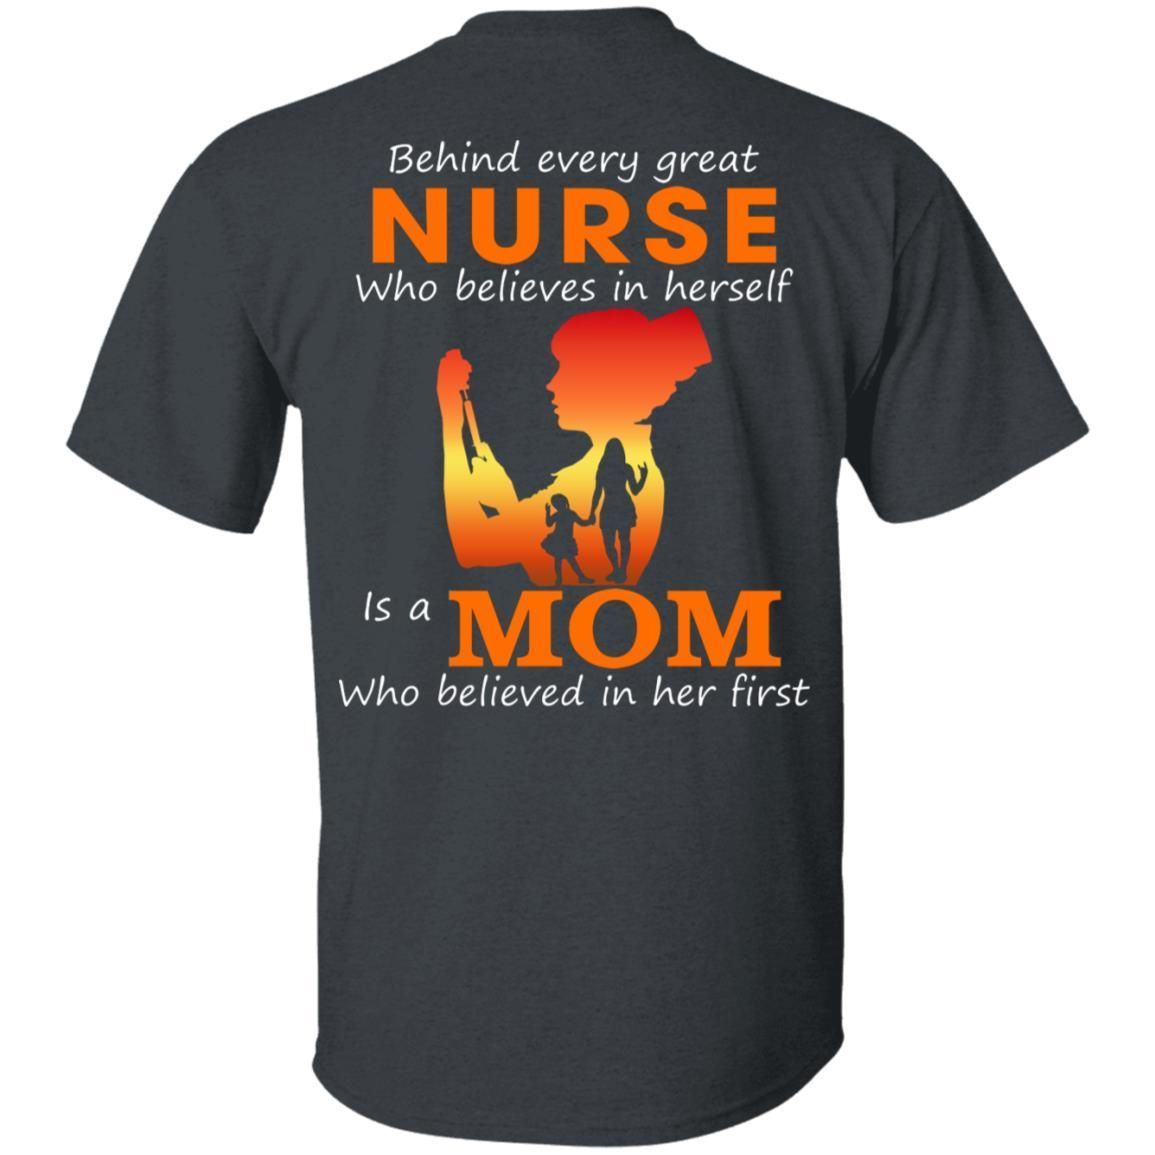 Behind every great nurse who believes in herself is a Mom shirts